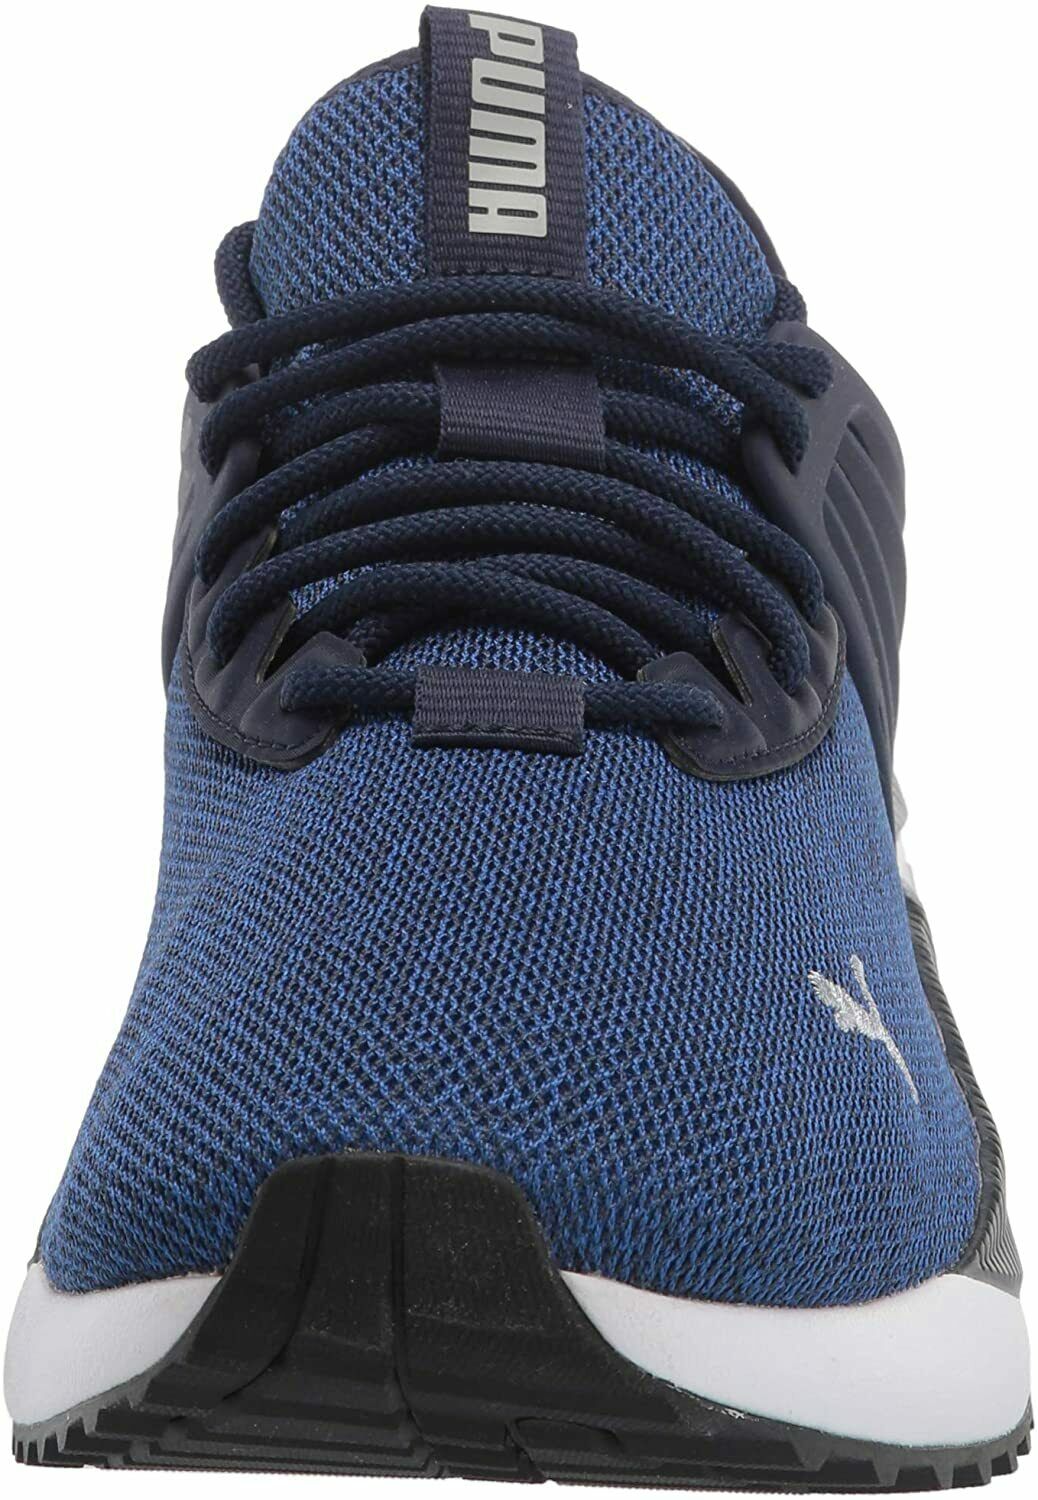 Puma Men's Pacer Future Knit Athletic Train Sneakers 38060301 - image 3 of 5